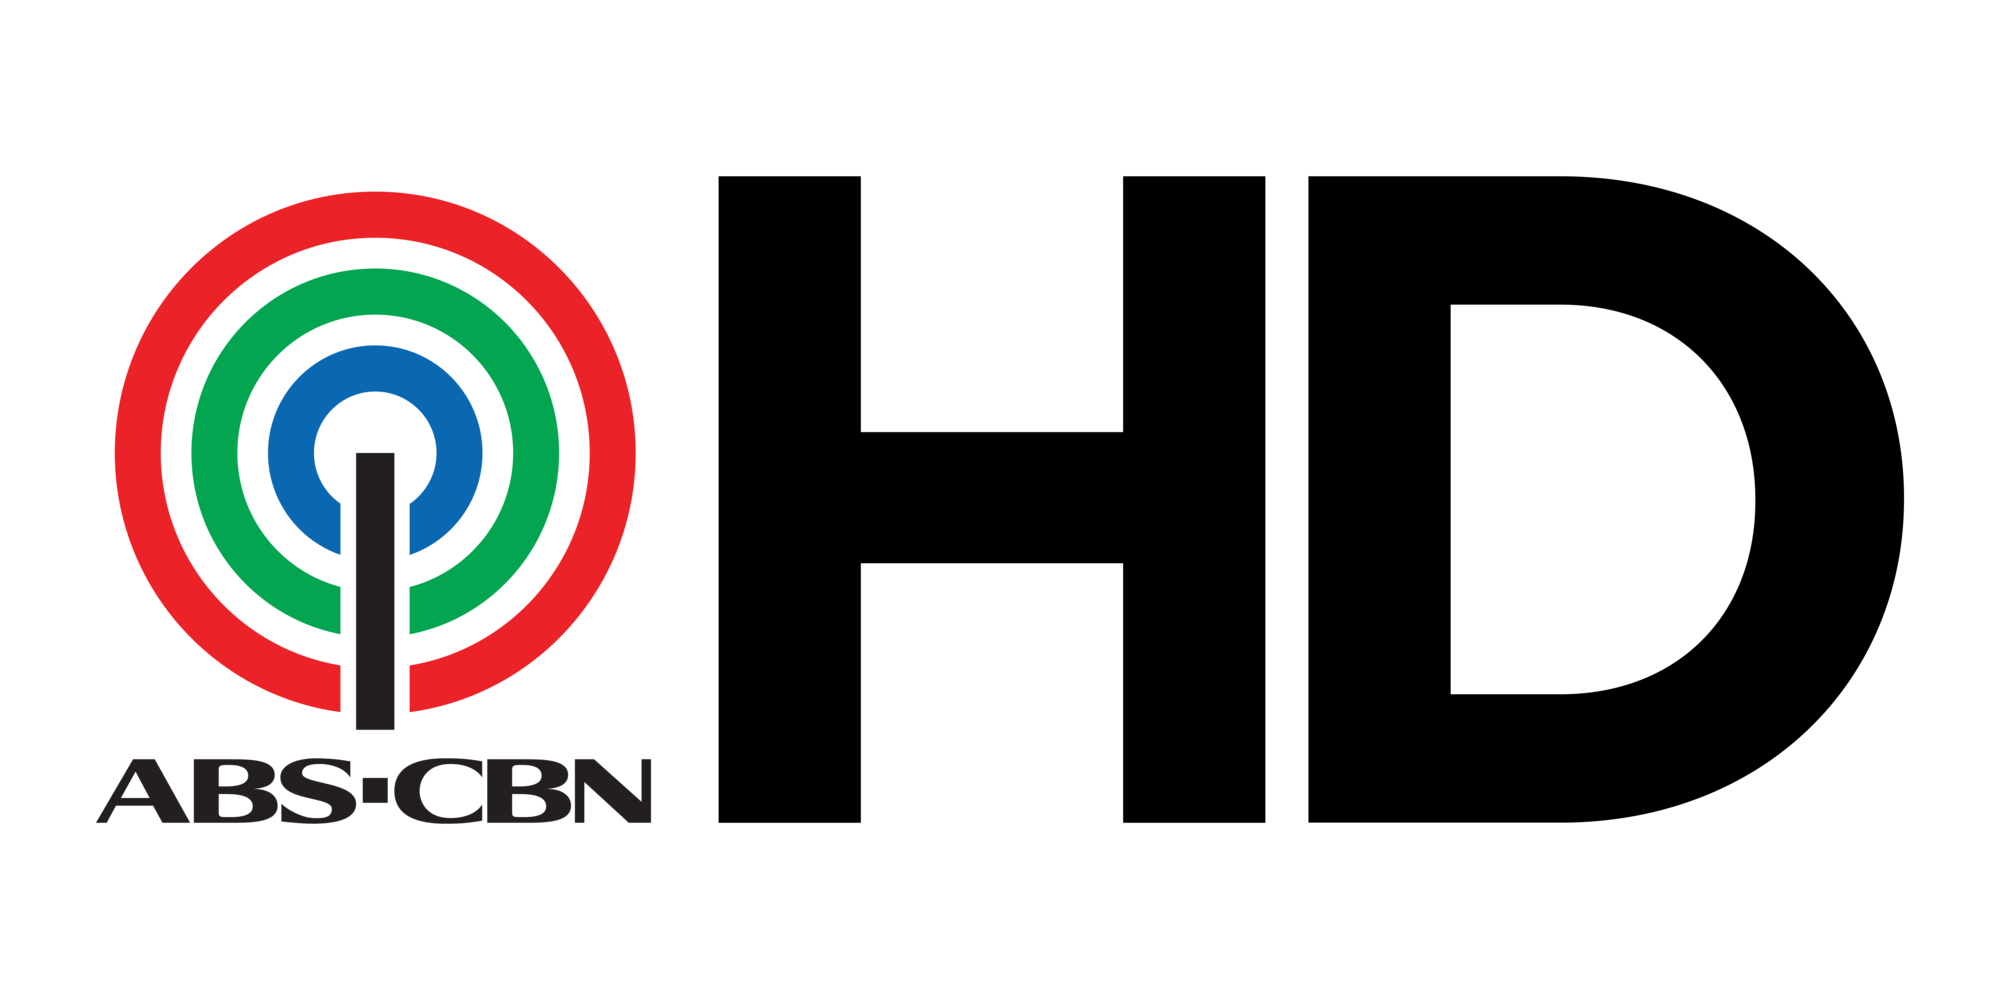 Abs Cbn Hd Logo.png - Abs Cbn, Transparent background PNG HD thumbnail